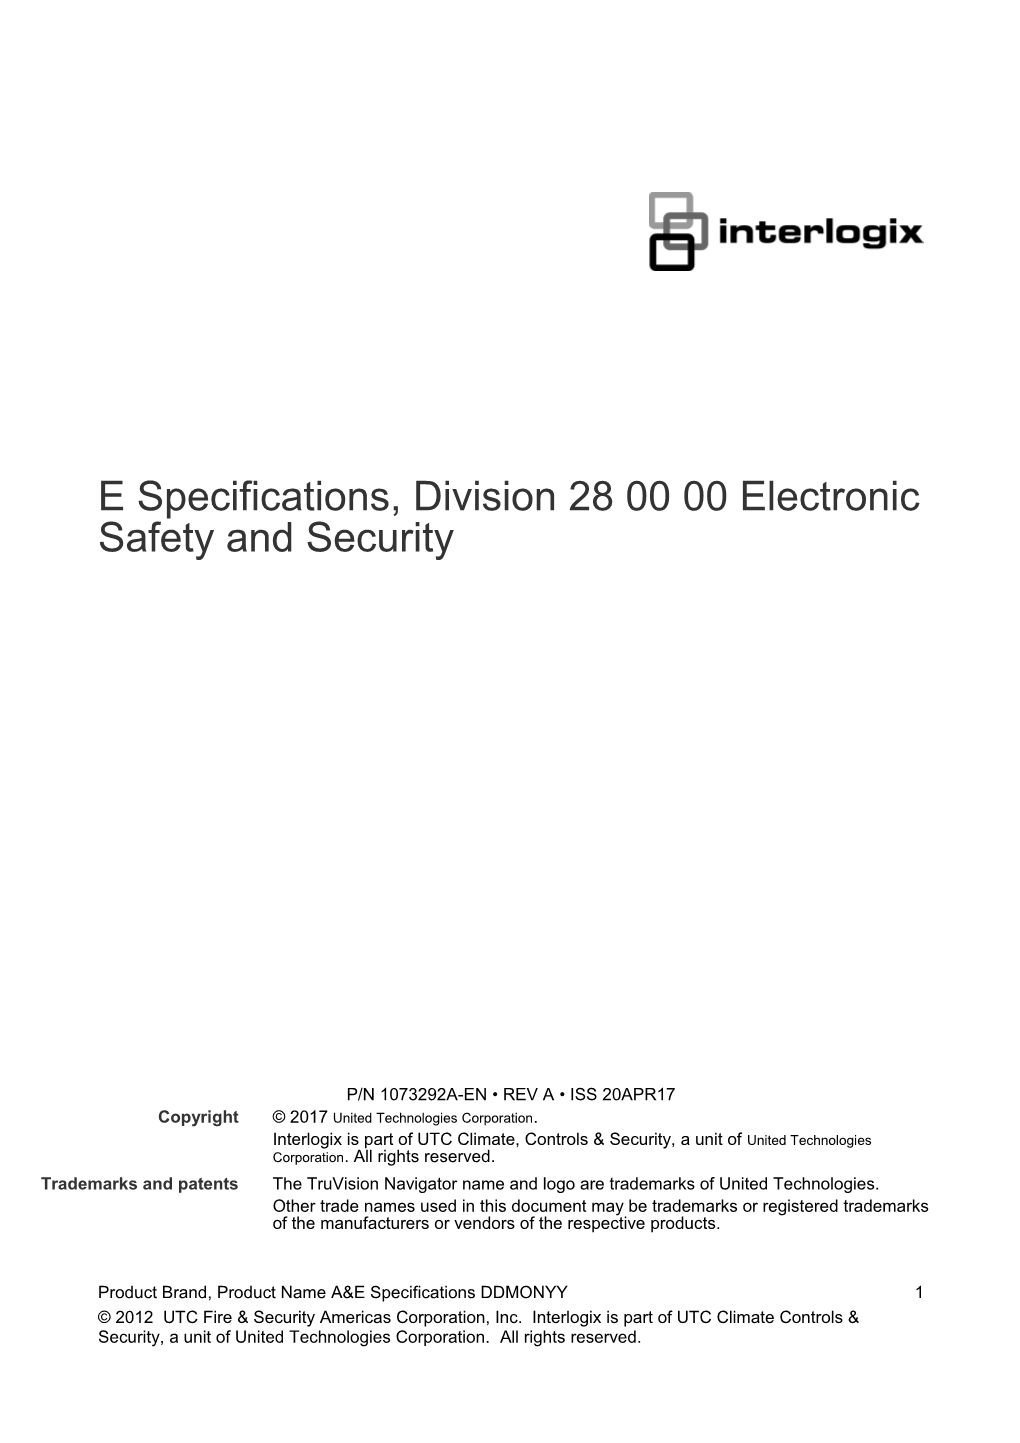 Truvision Navigator 7.0 A&E Specifications, Division 28 00 00 Electronic Safety and Security